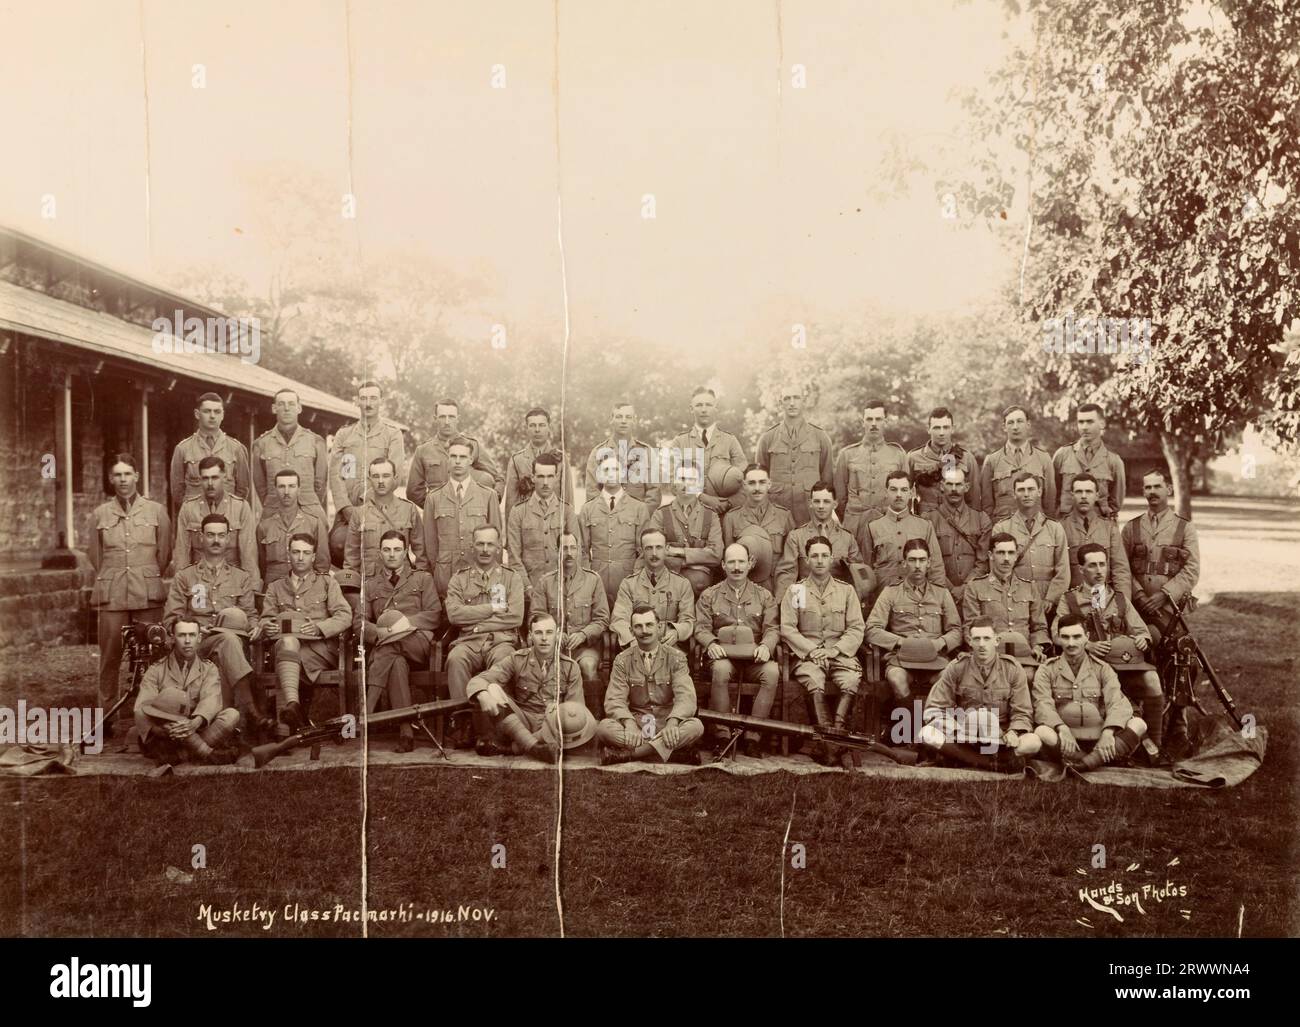 Trainee British musketeers pose for a group portrait with their rifles outside the School of Musketry at Pachmarhi. Winthrop studied for this course at Pachmarhi from October -December 1916.  Printed caption: Musketry Class Pachmarhi - 1916. Nov. Hands & Son Photos. Stock Photo